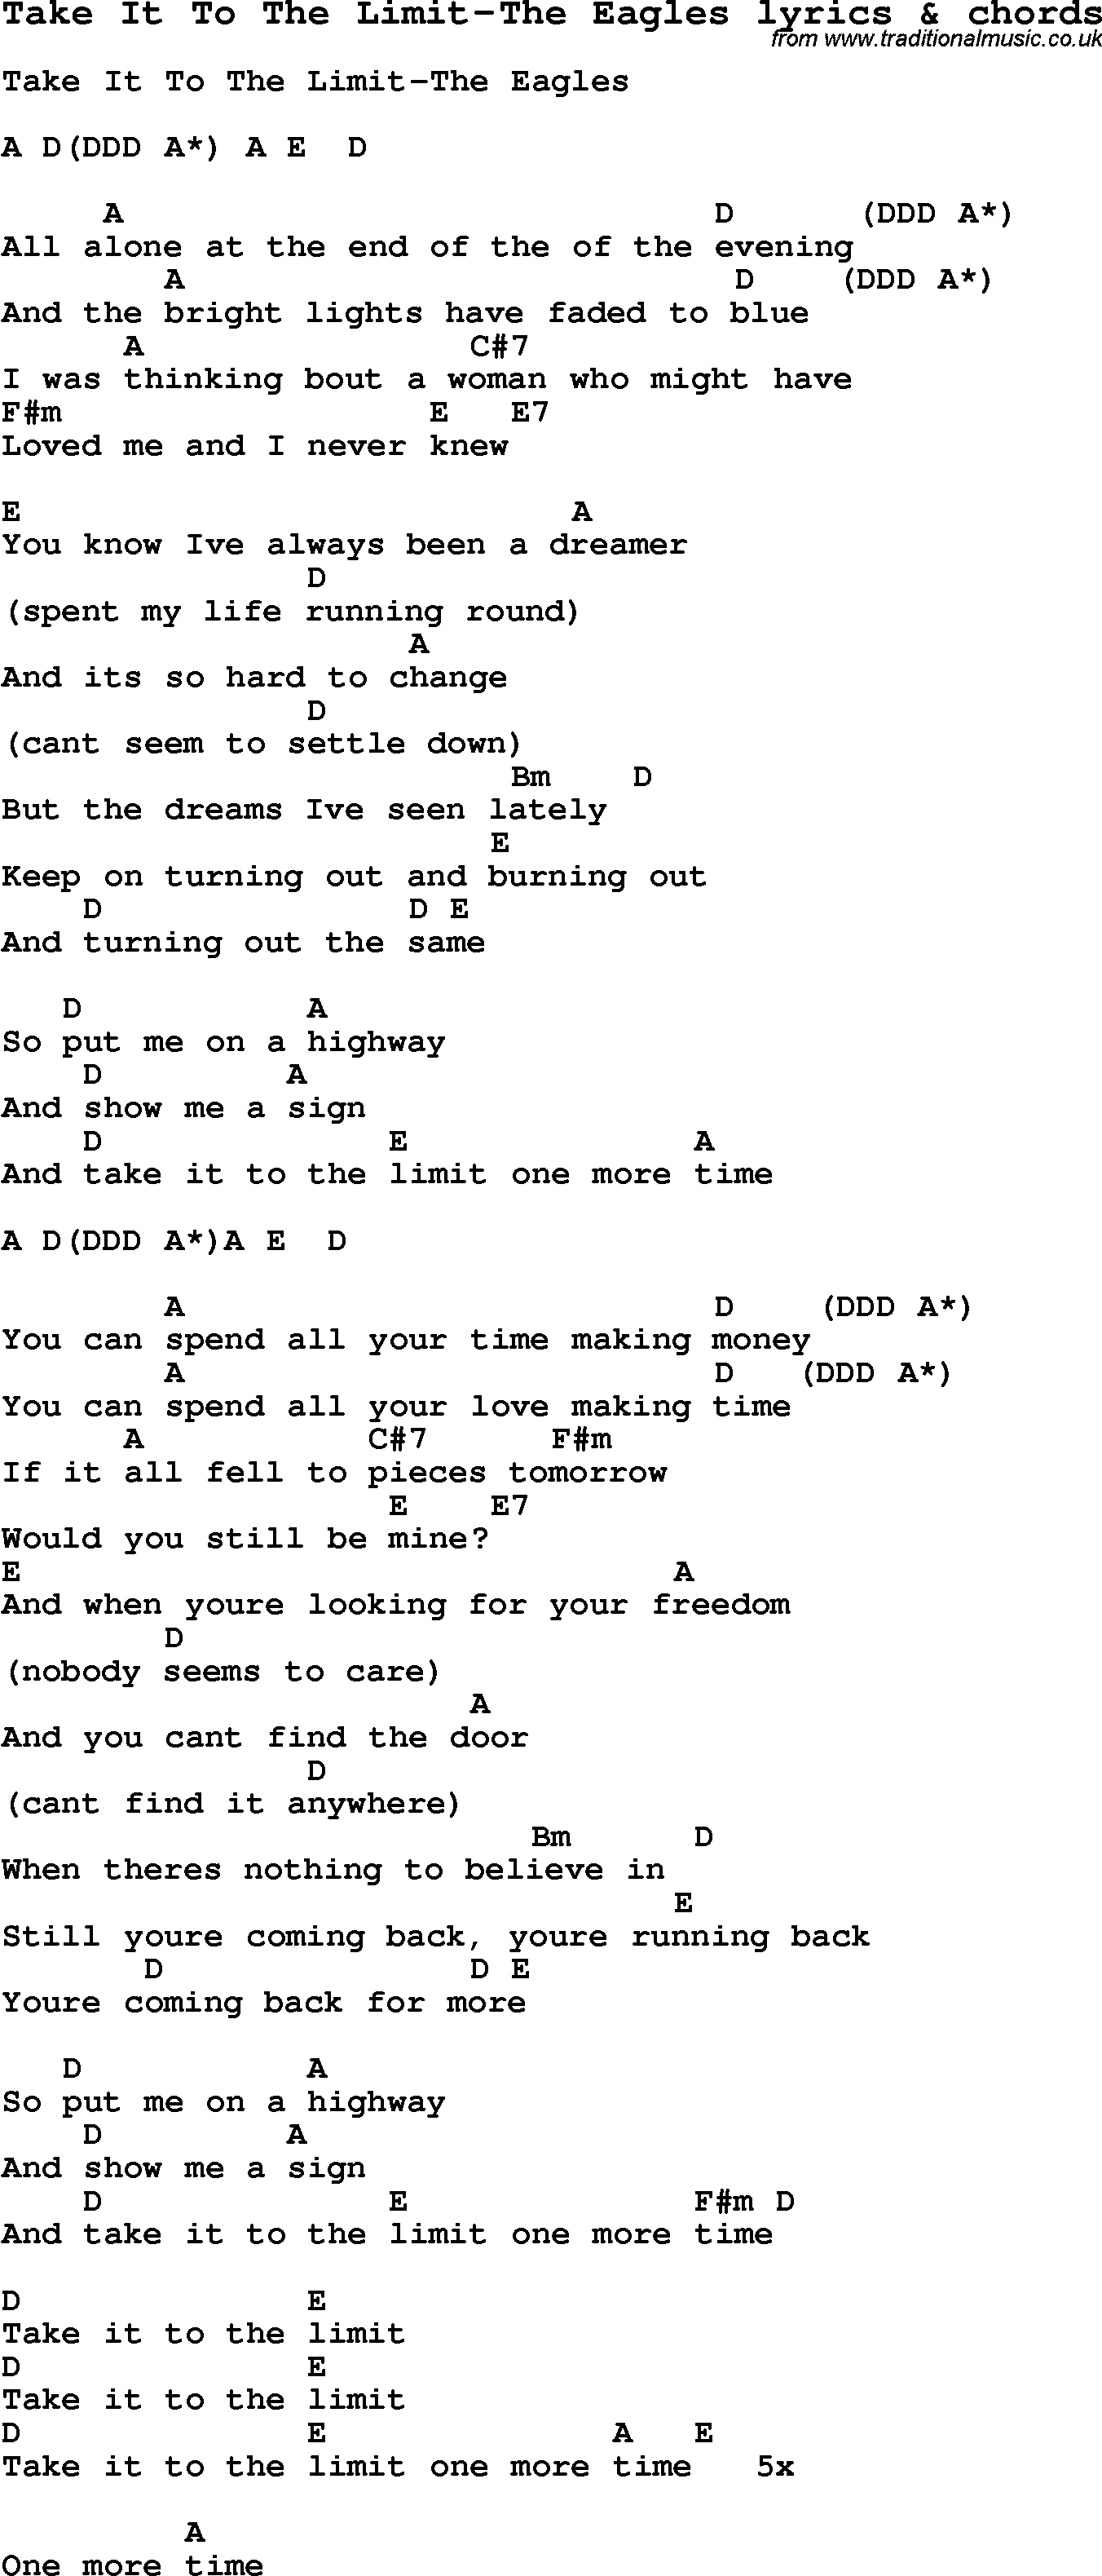 Love Song Lyrics for: Take It To The Limit-The Eagles with chords for Ukulele, Guitar Banjo etc.